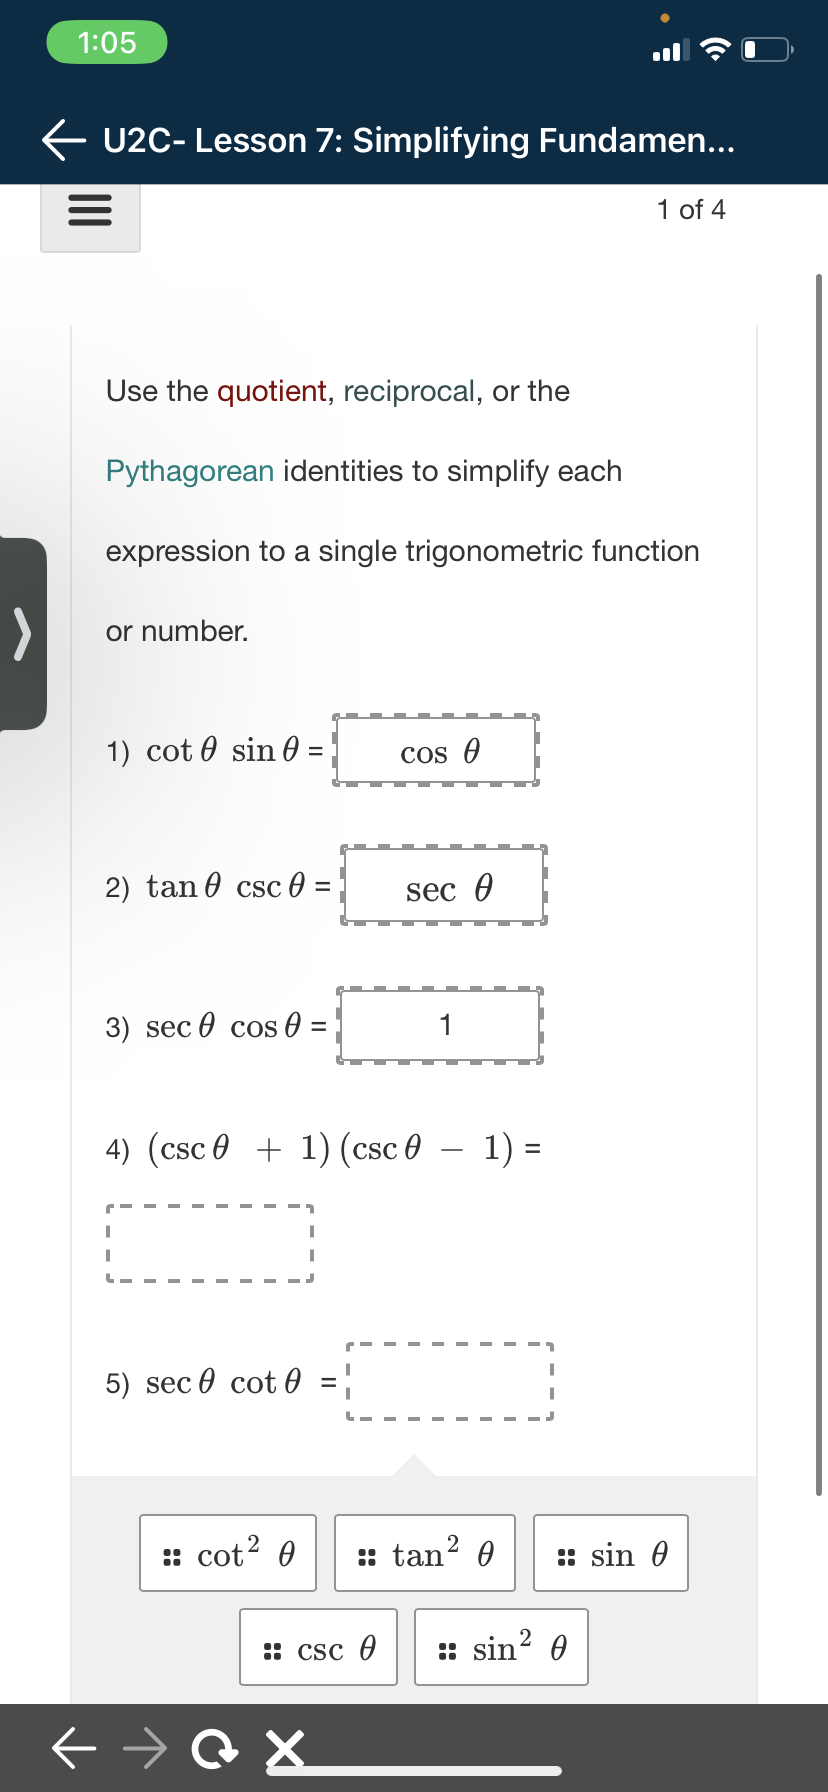 1:05
← U2C- Lesson 7: Simplifying Fundamen...
=
>
Use the quotient, reciprocal, or the
Pythagorean identities to simplify each
expression to a single trigonometric function
or number.
1) cot sin
2) tan csc 0 =
3) sec cos
I
I
L
=
:: cot² 0
=
5) sec cot0 =
I
4) (csc0 + 1) (csc 0 − 1) =
Сх
cos A
:: csc 0
sec 0
1
:: tan² 0
:: sin²
1 of 4
::sin 0
Ө